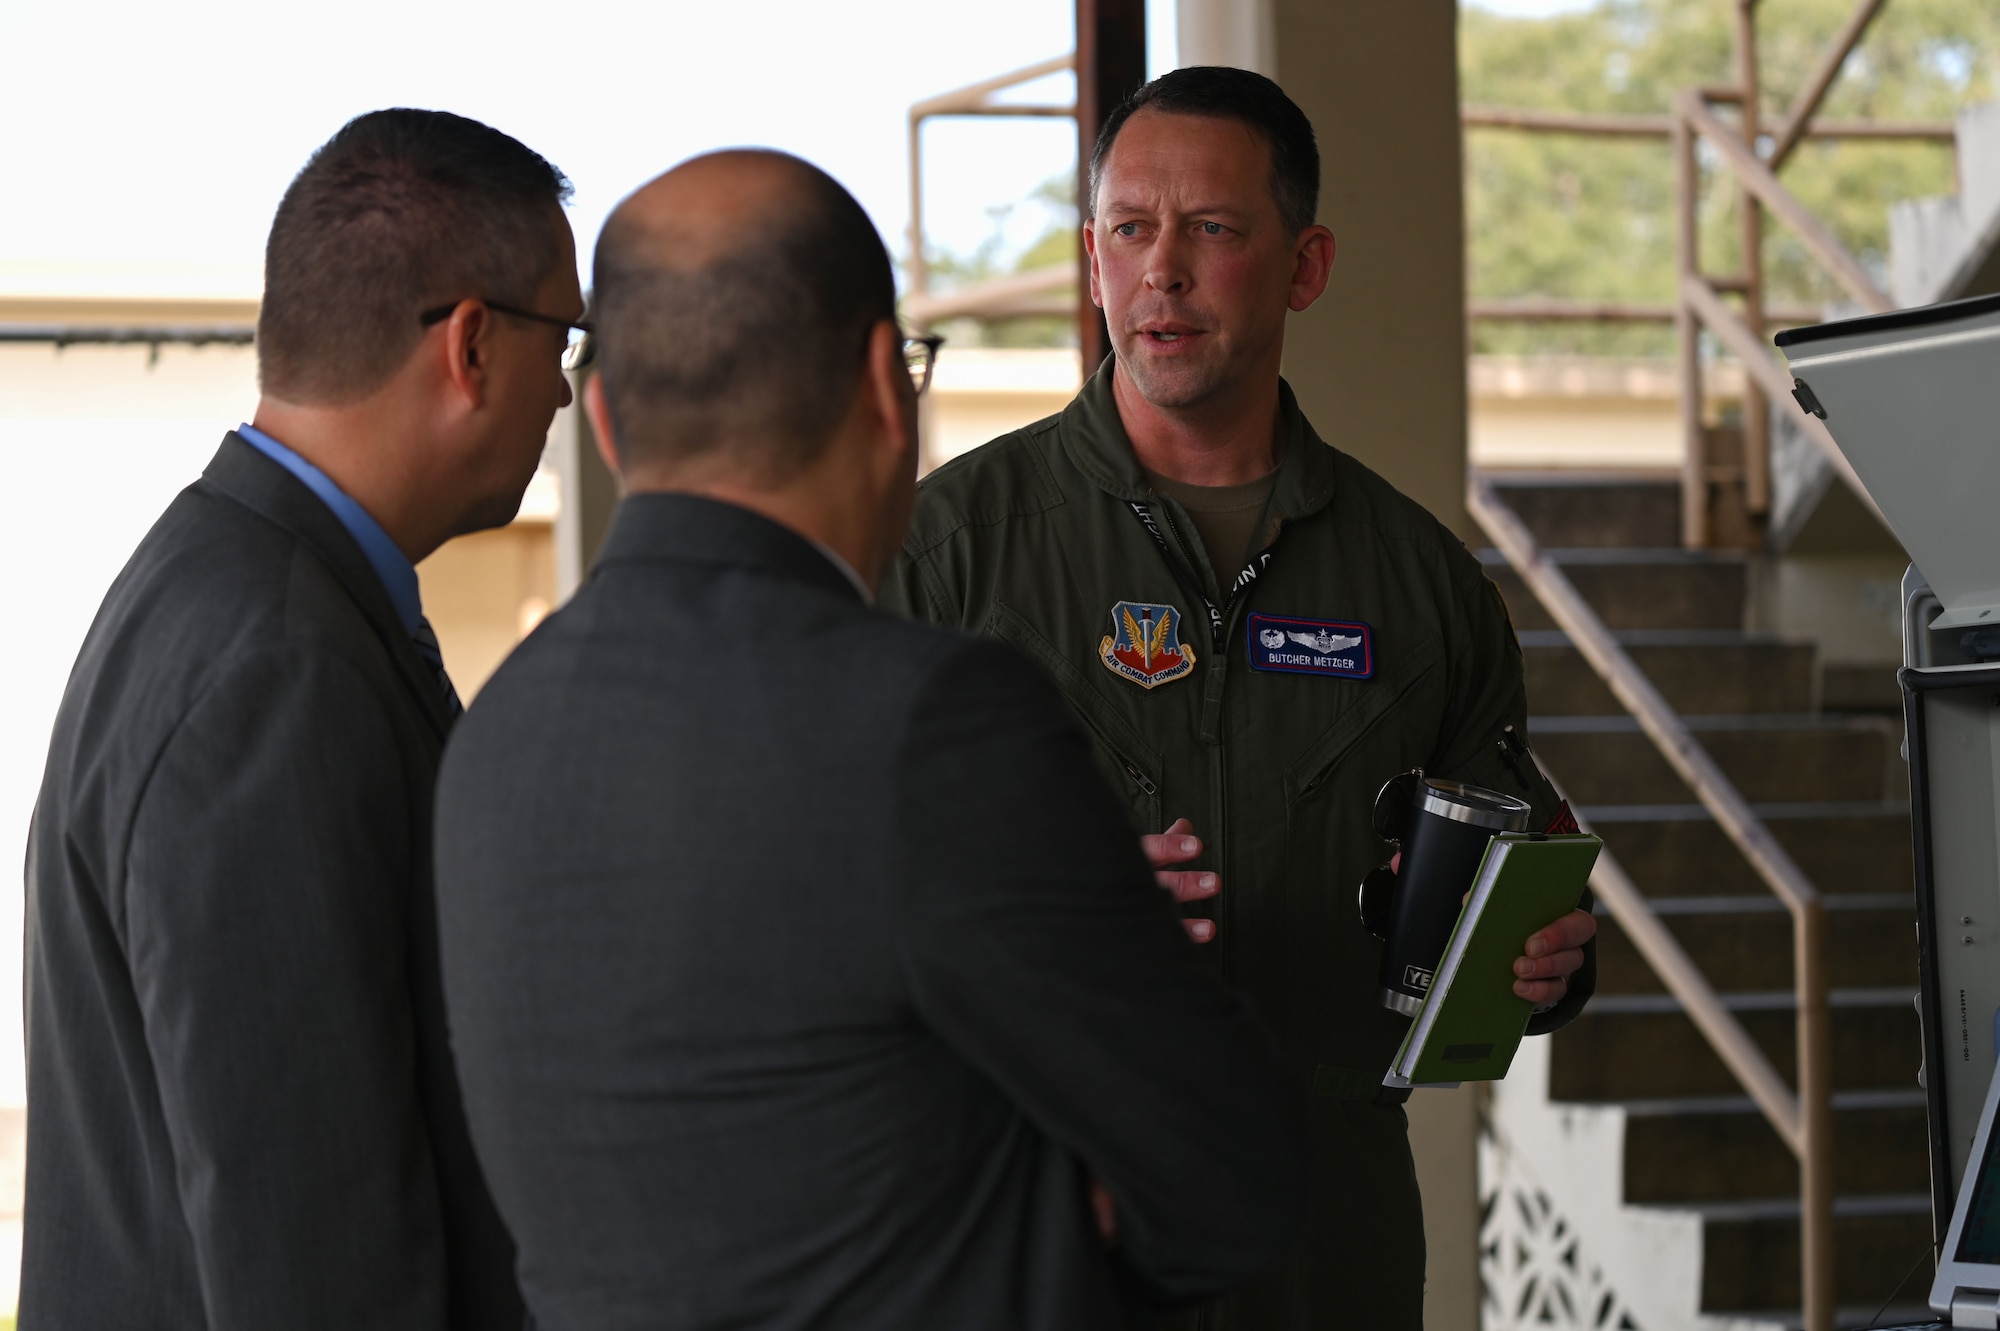 U.S. Air Force Lt. Col. Thomas E. Metzger, 87th Electronic Warfare Squadron commander, briefs John F. Vona, Air Combat Command deputy director of the plans, program and requirements directorate, right, and Dr. John D. Matyjas, ACC chief scientist, left, pose for a photo at Eglin Air Force Base, Fla., April 11, 2023. The 87th EWS is responsible for all aspects of Air Force's lead Electronic Warfare Assessment Program COMBAT SHIELD. (U.S. Air Force photo by Staff Sgt. Ericka A. Woolever)